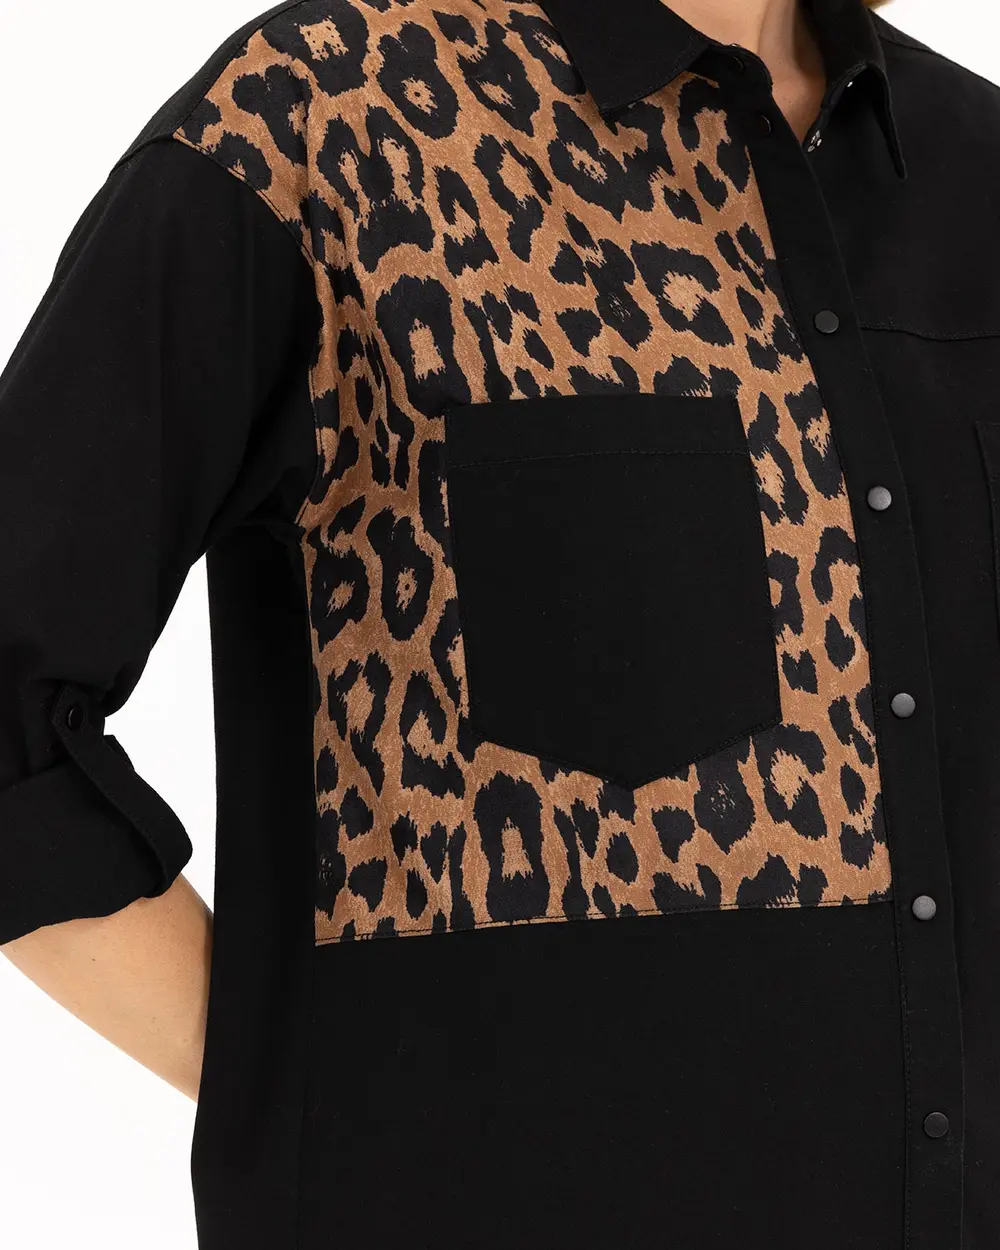 Leopard Patterned Shirt Collar Tunic